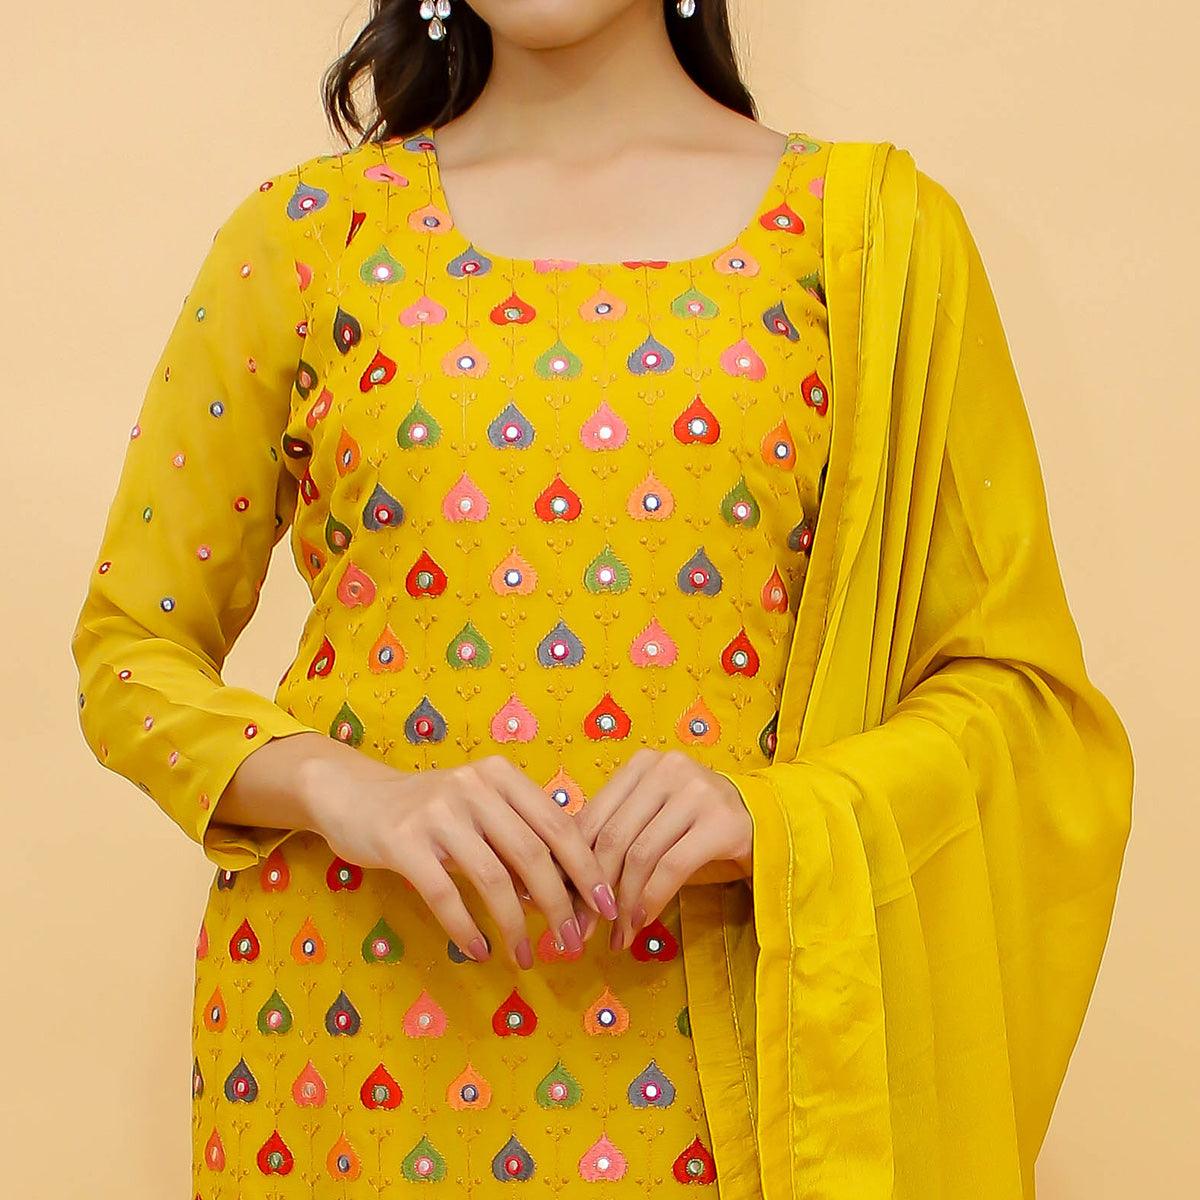 Yellow Sequence Embroidered With Embellished Chiffon Sharara Suit - Peachmode